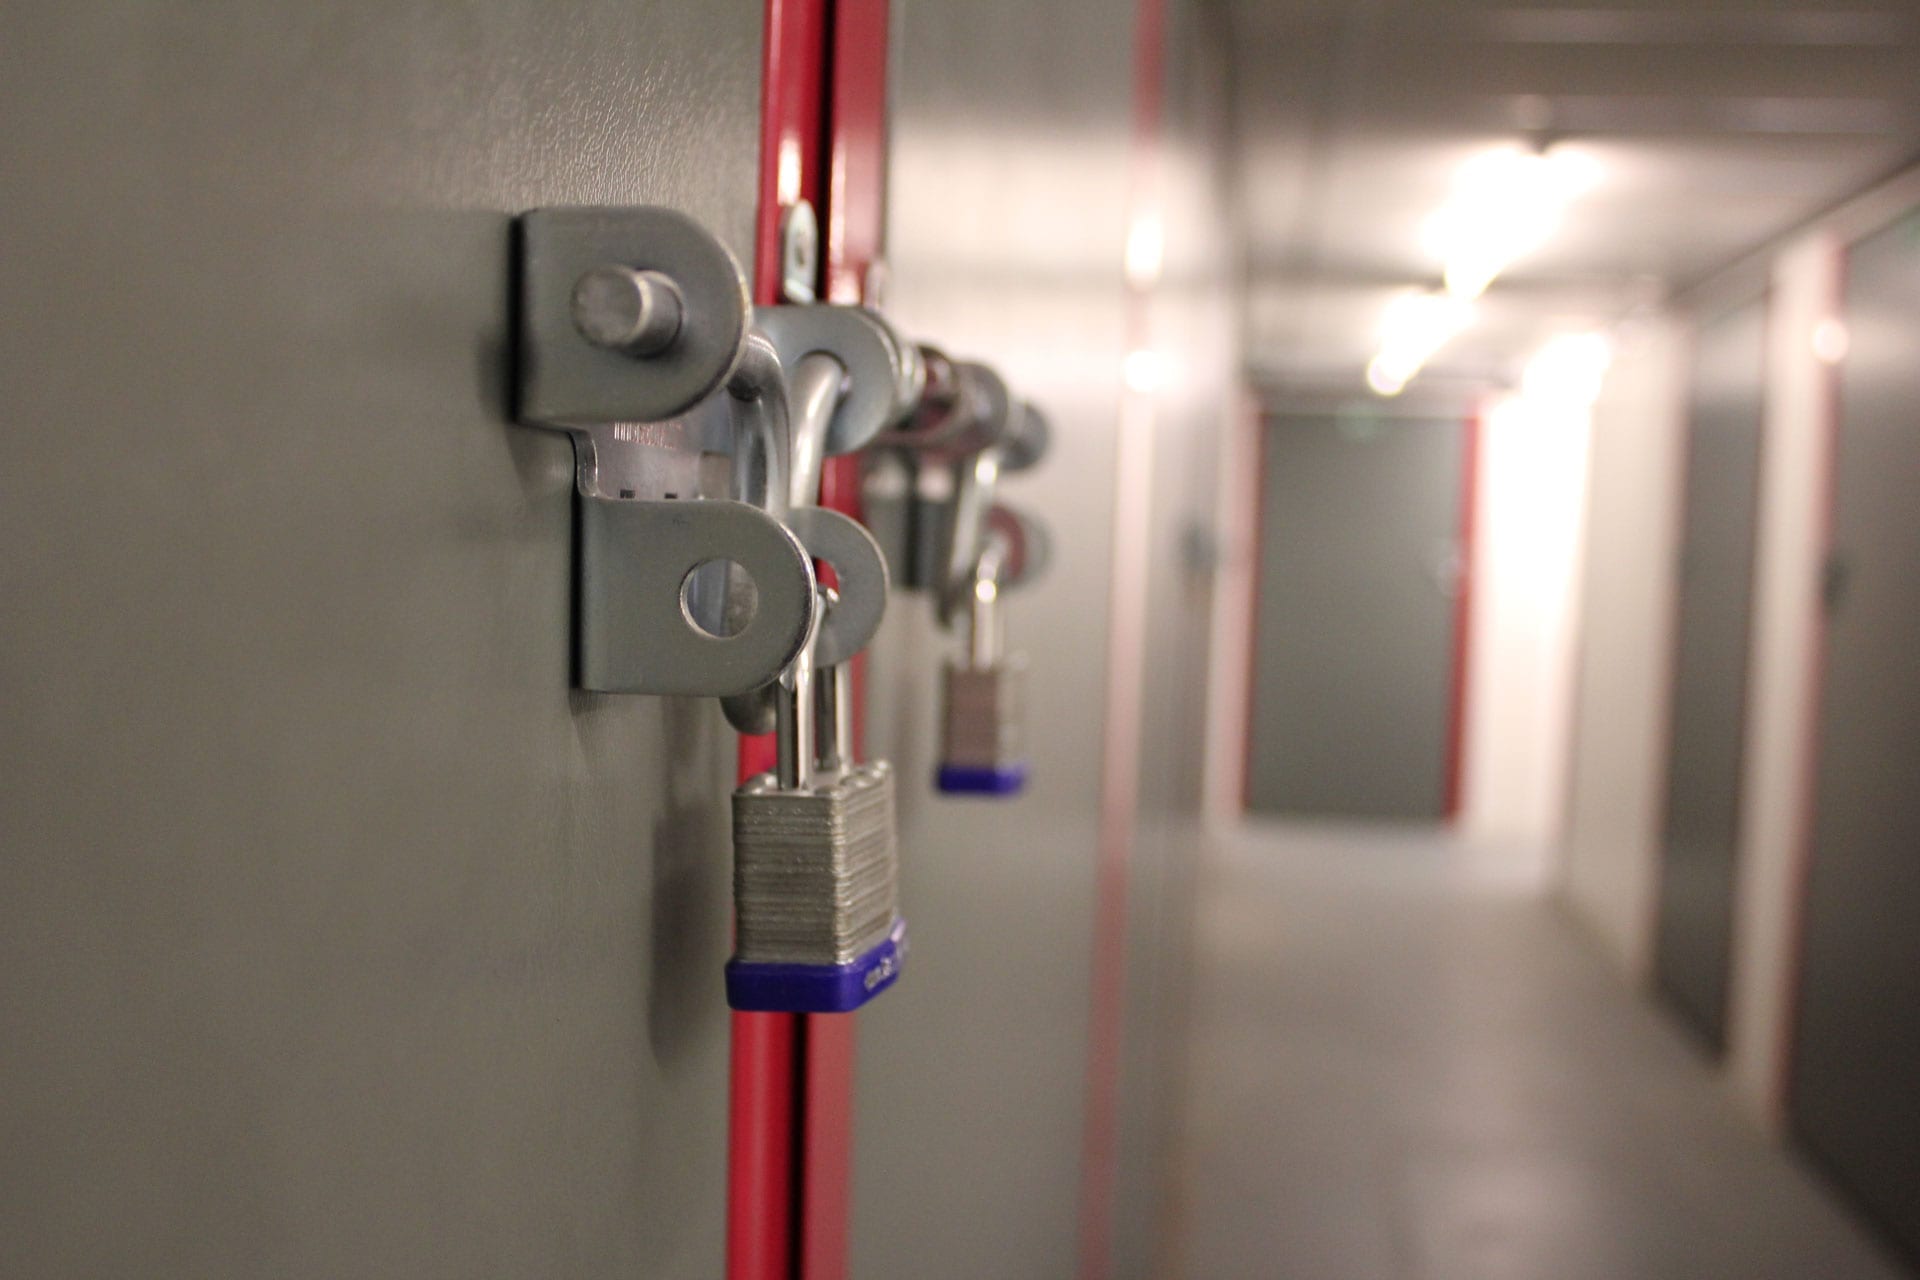 How secure is self storage? How do I protect my belongings?